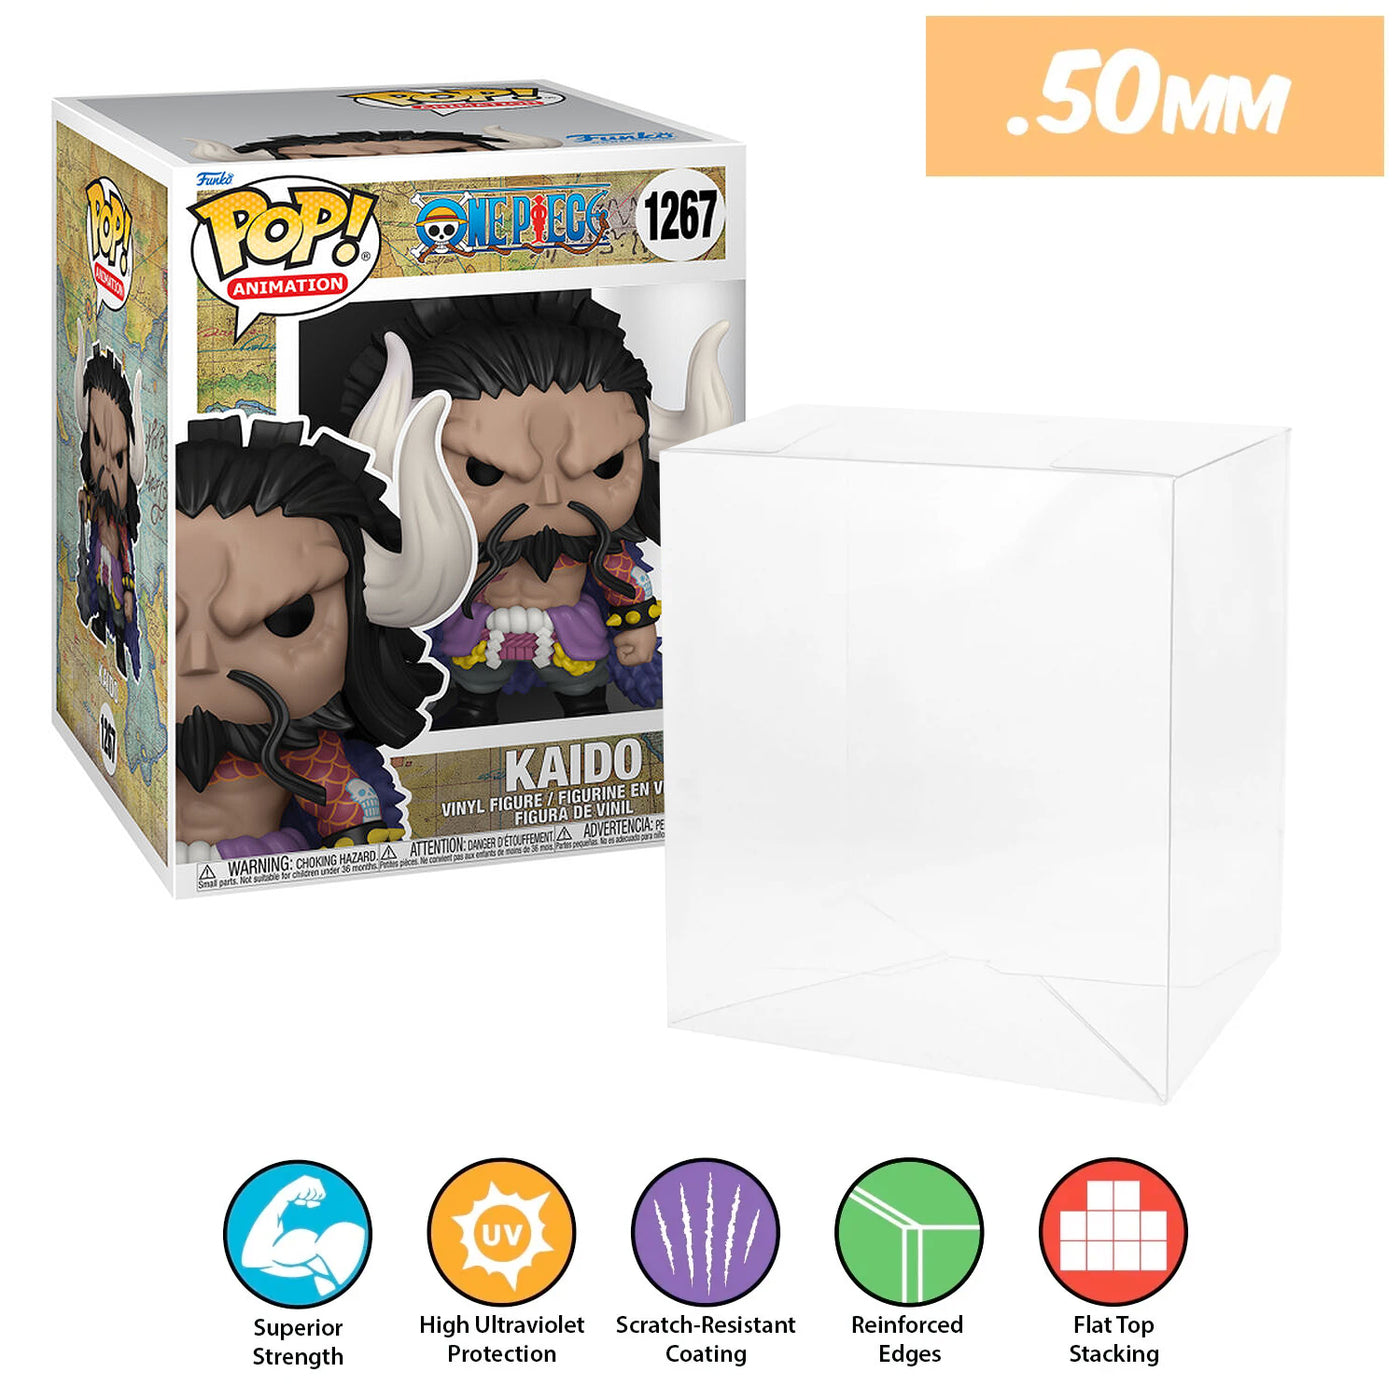 1267 one piece kaido 6 inch best funko pop protectors thick strong uv scratch flat top stack vinyl display geek plastic shield vaulted eco armor fits collect protect display case kollector protector